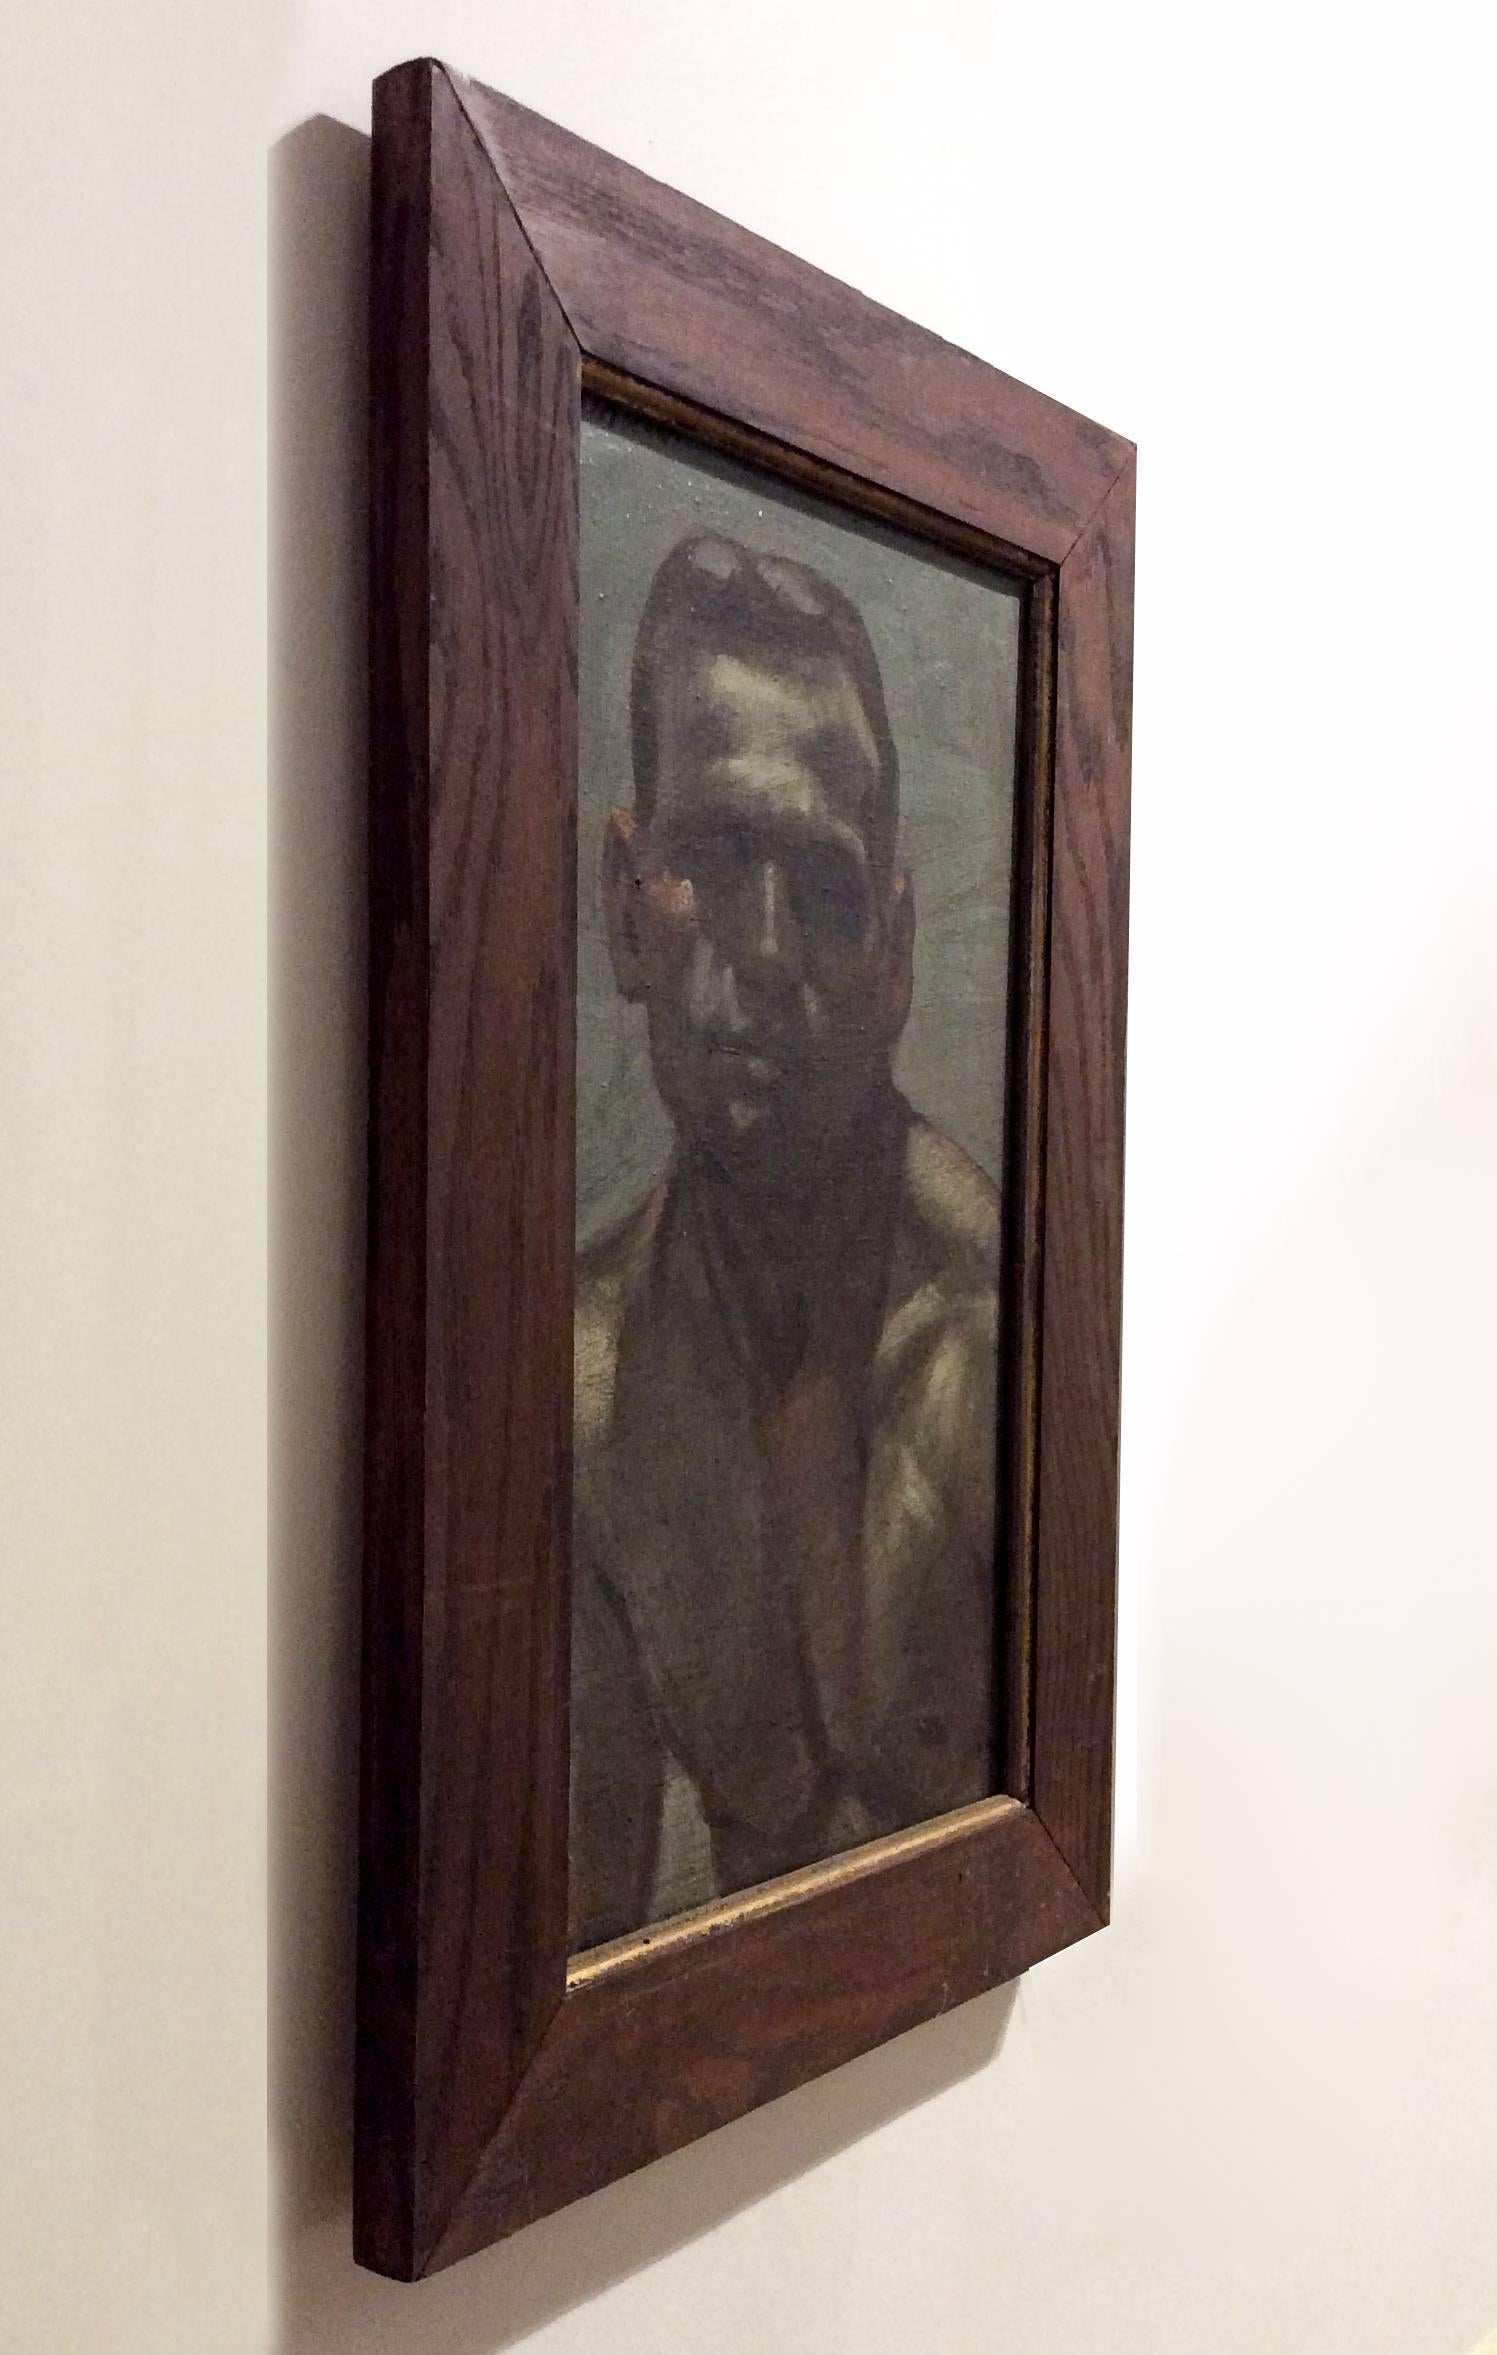 Modern, academic style portrait painting on canvas of a young athletic male 
oil on canvas, 26 x 17 inches in antique wood frame

This vertical, contemporary portrait painting of single young male was made by Mark Beard under his fictitious artistic